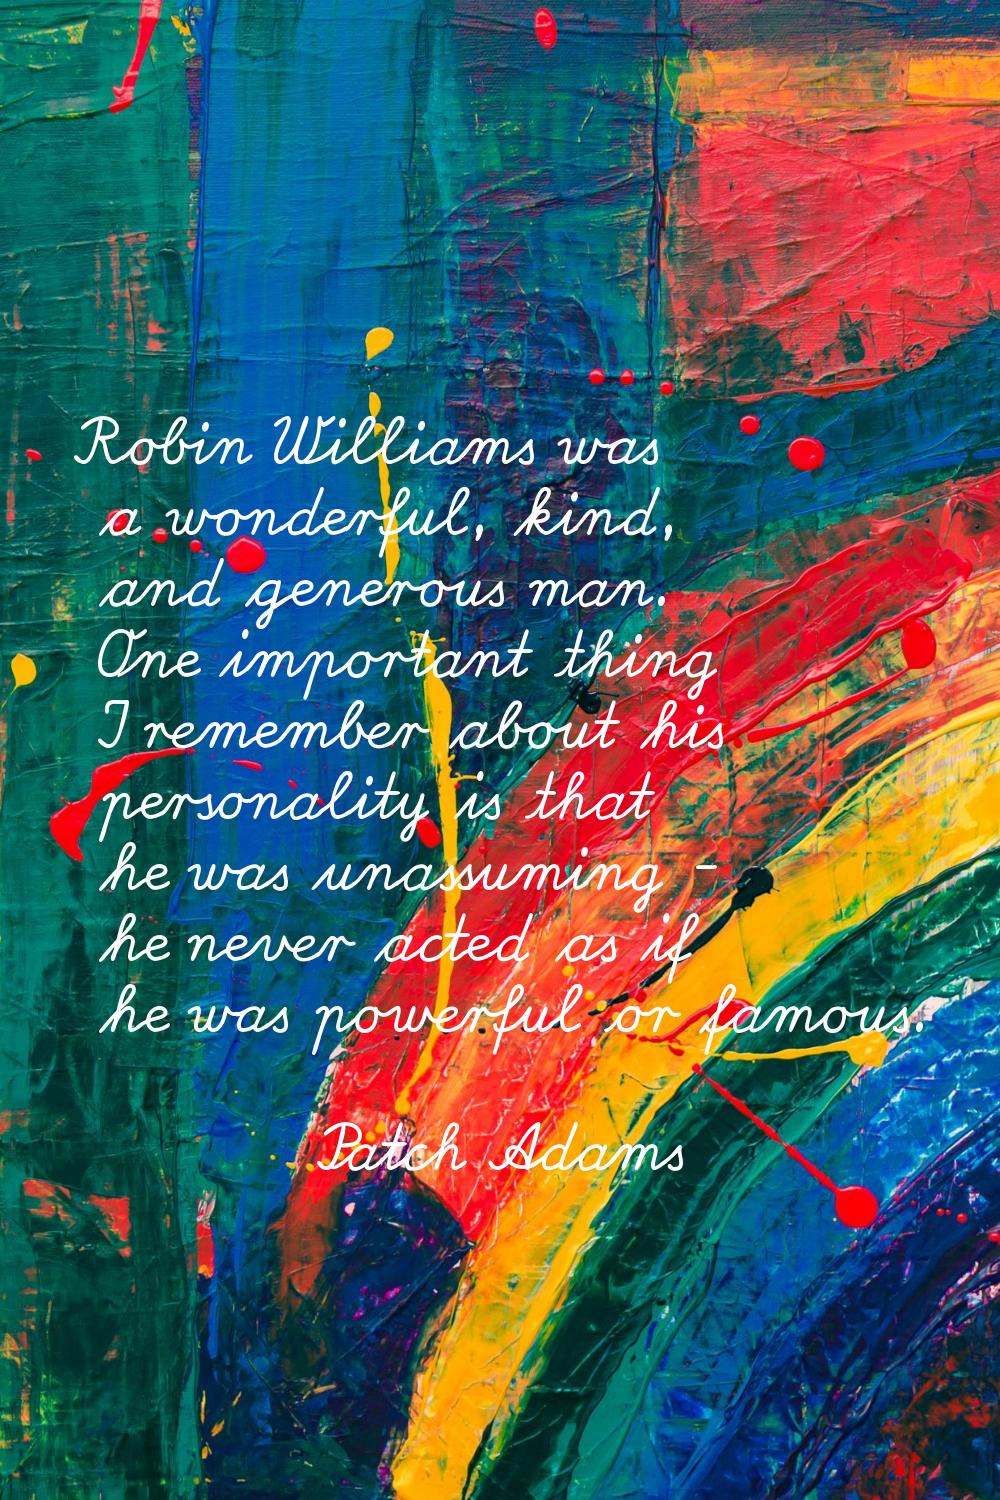 Robin Williams was a wonderful, kind, and generous man. One important thing I remember about his pe